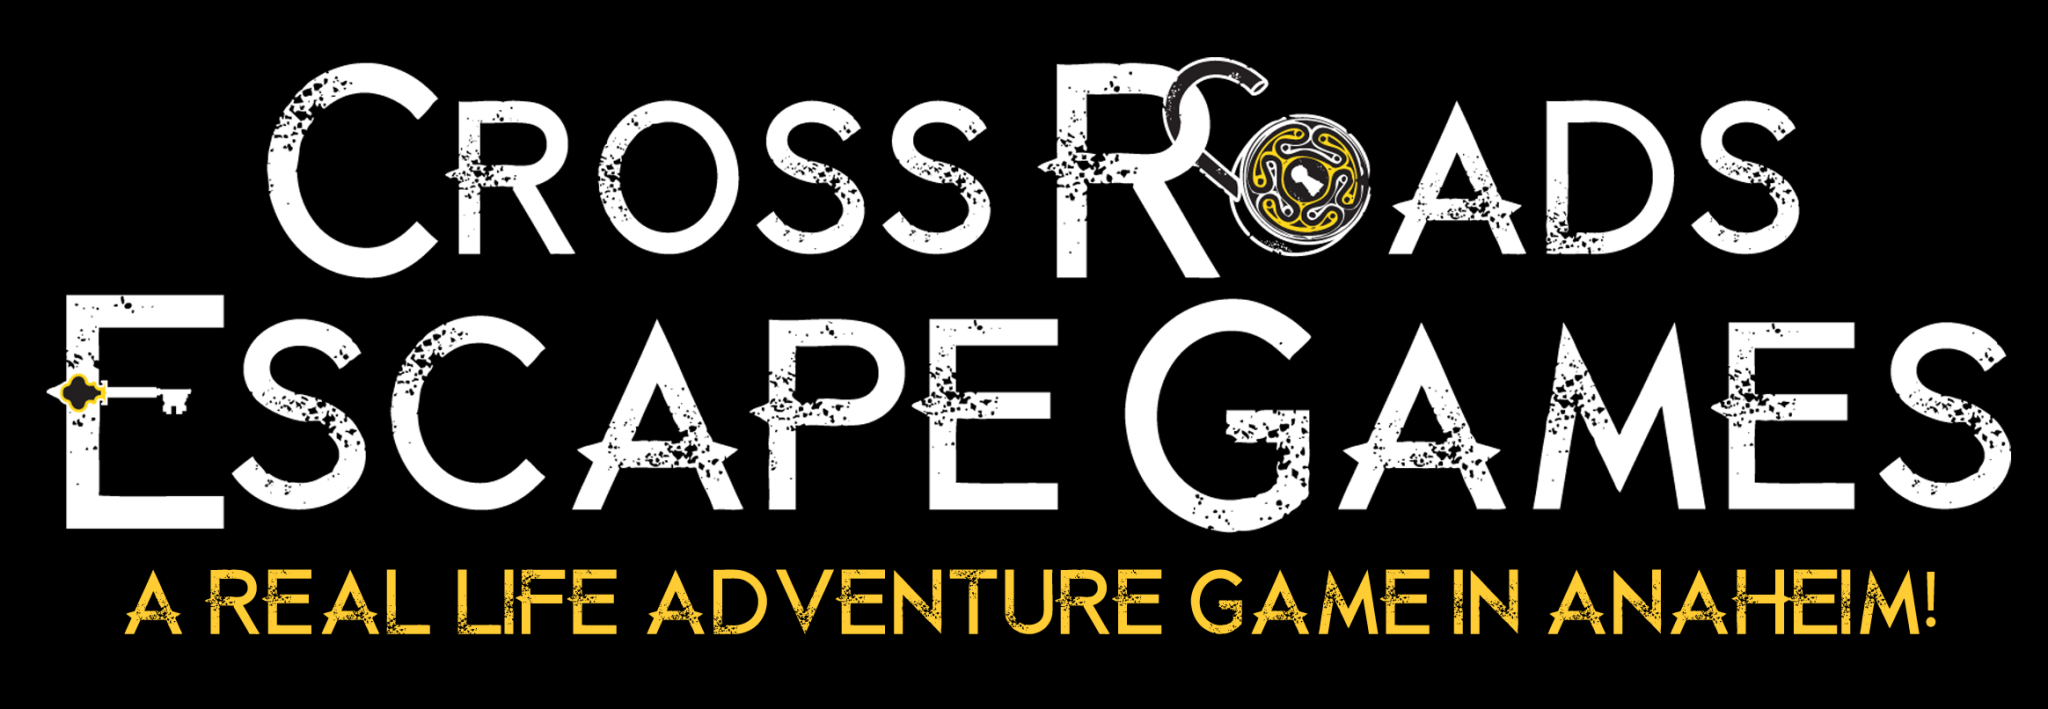 Gift Cards - Cross Roads Escape Games